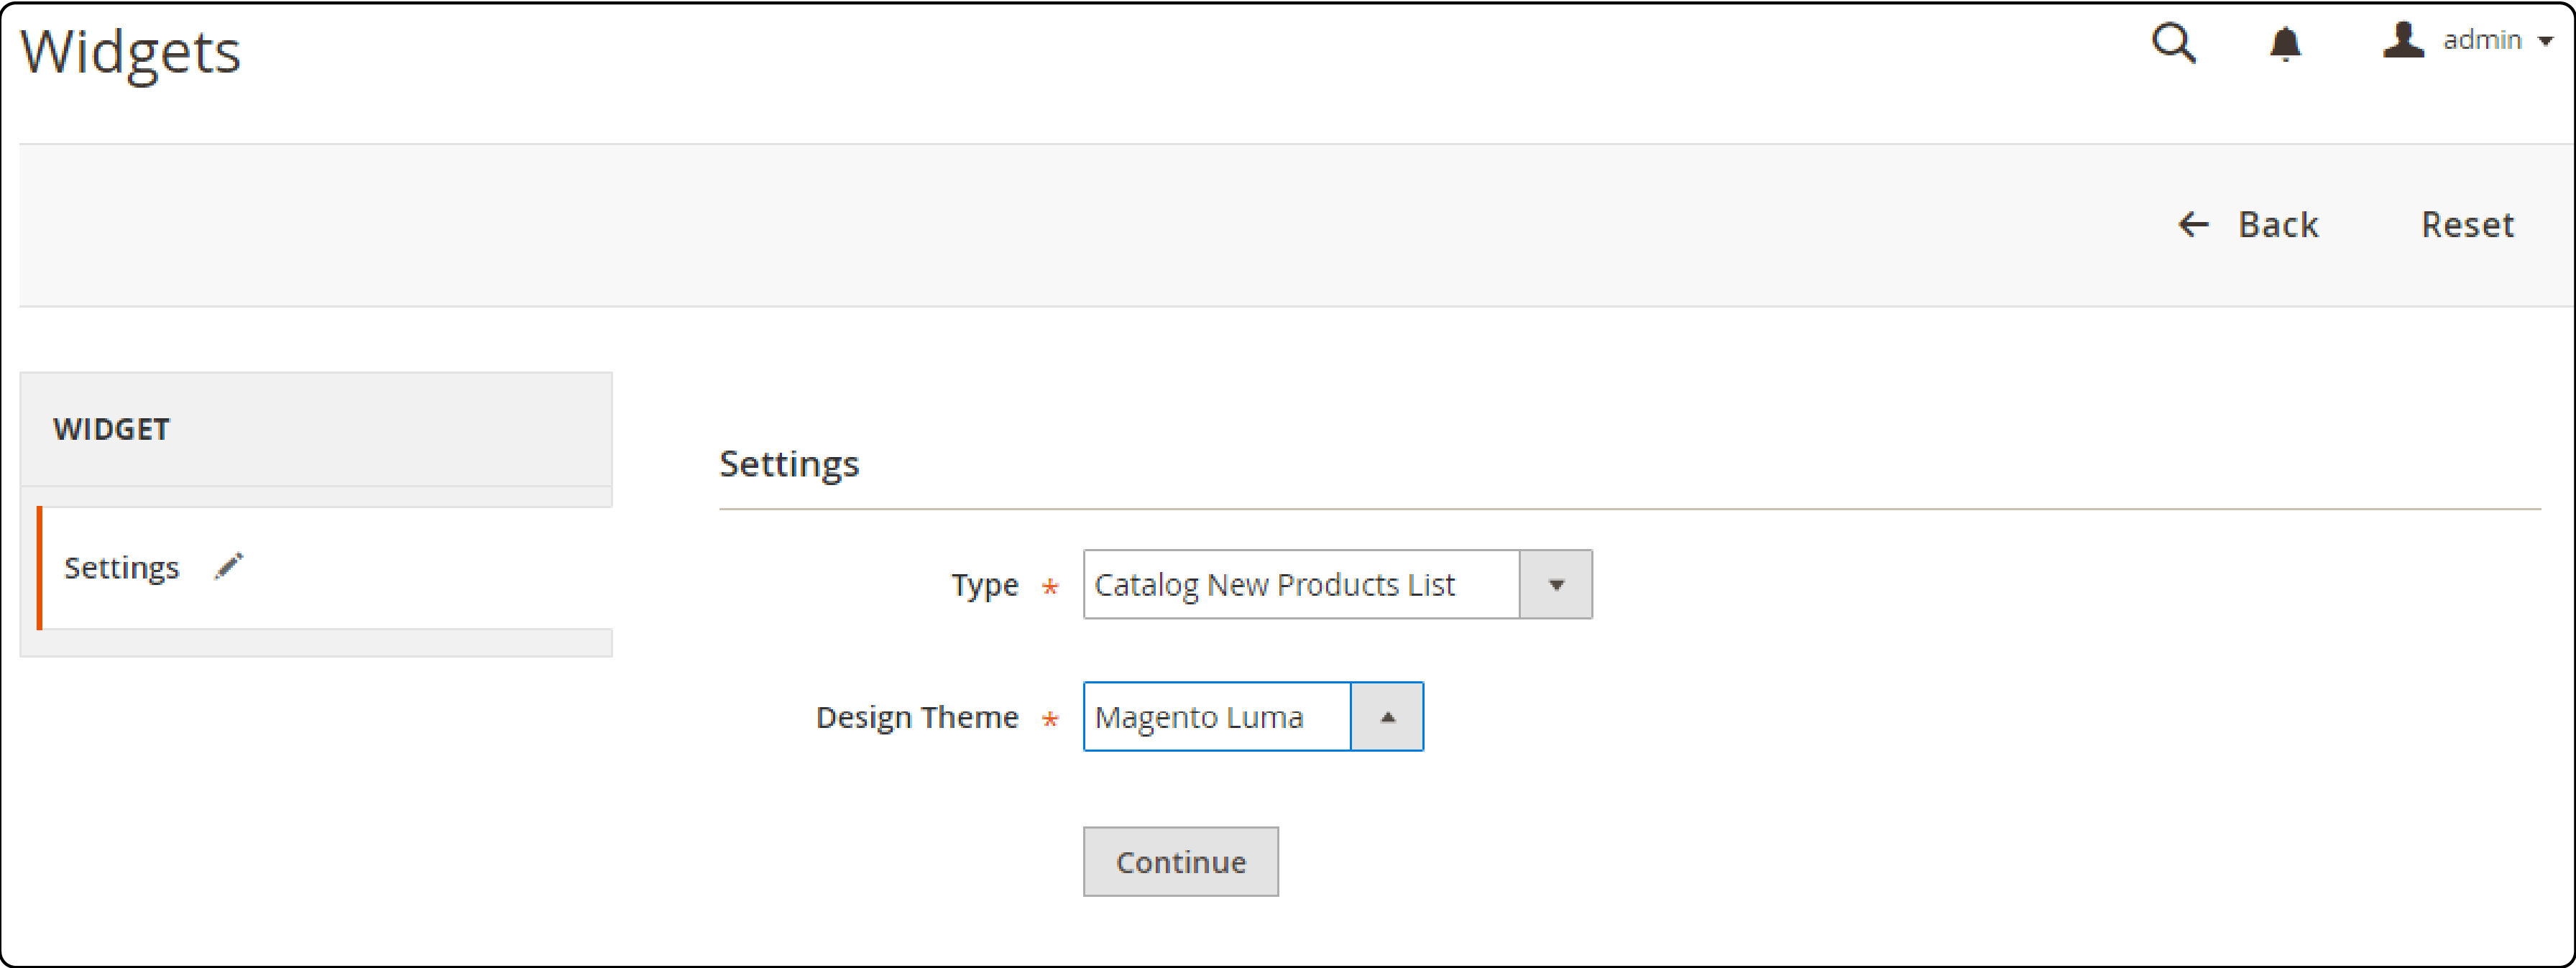 How to configure the New Products List Widget in Magento 2 for better product visibility